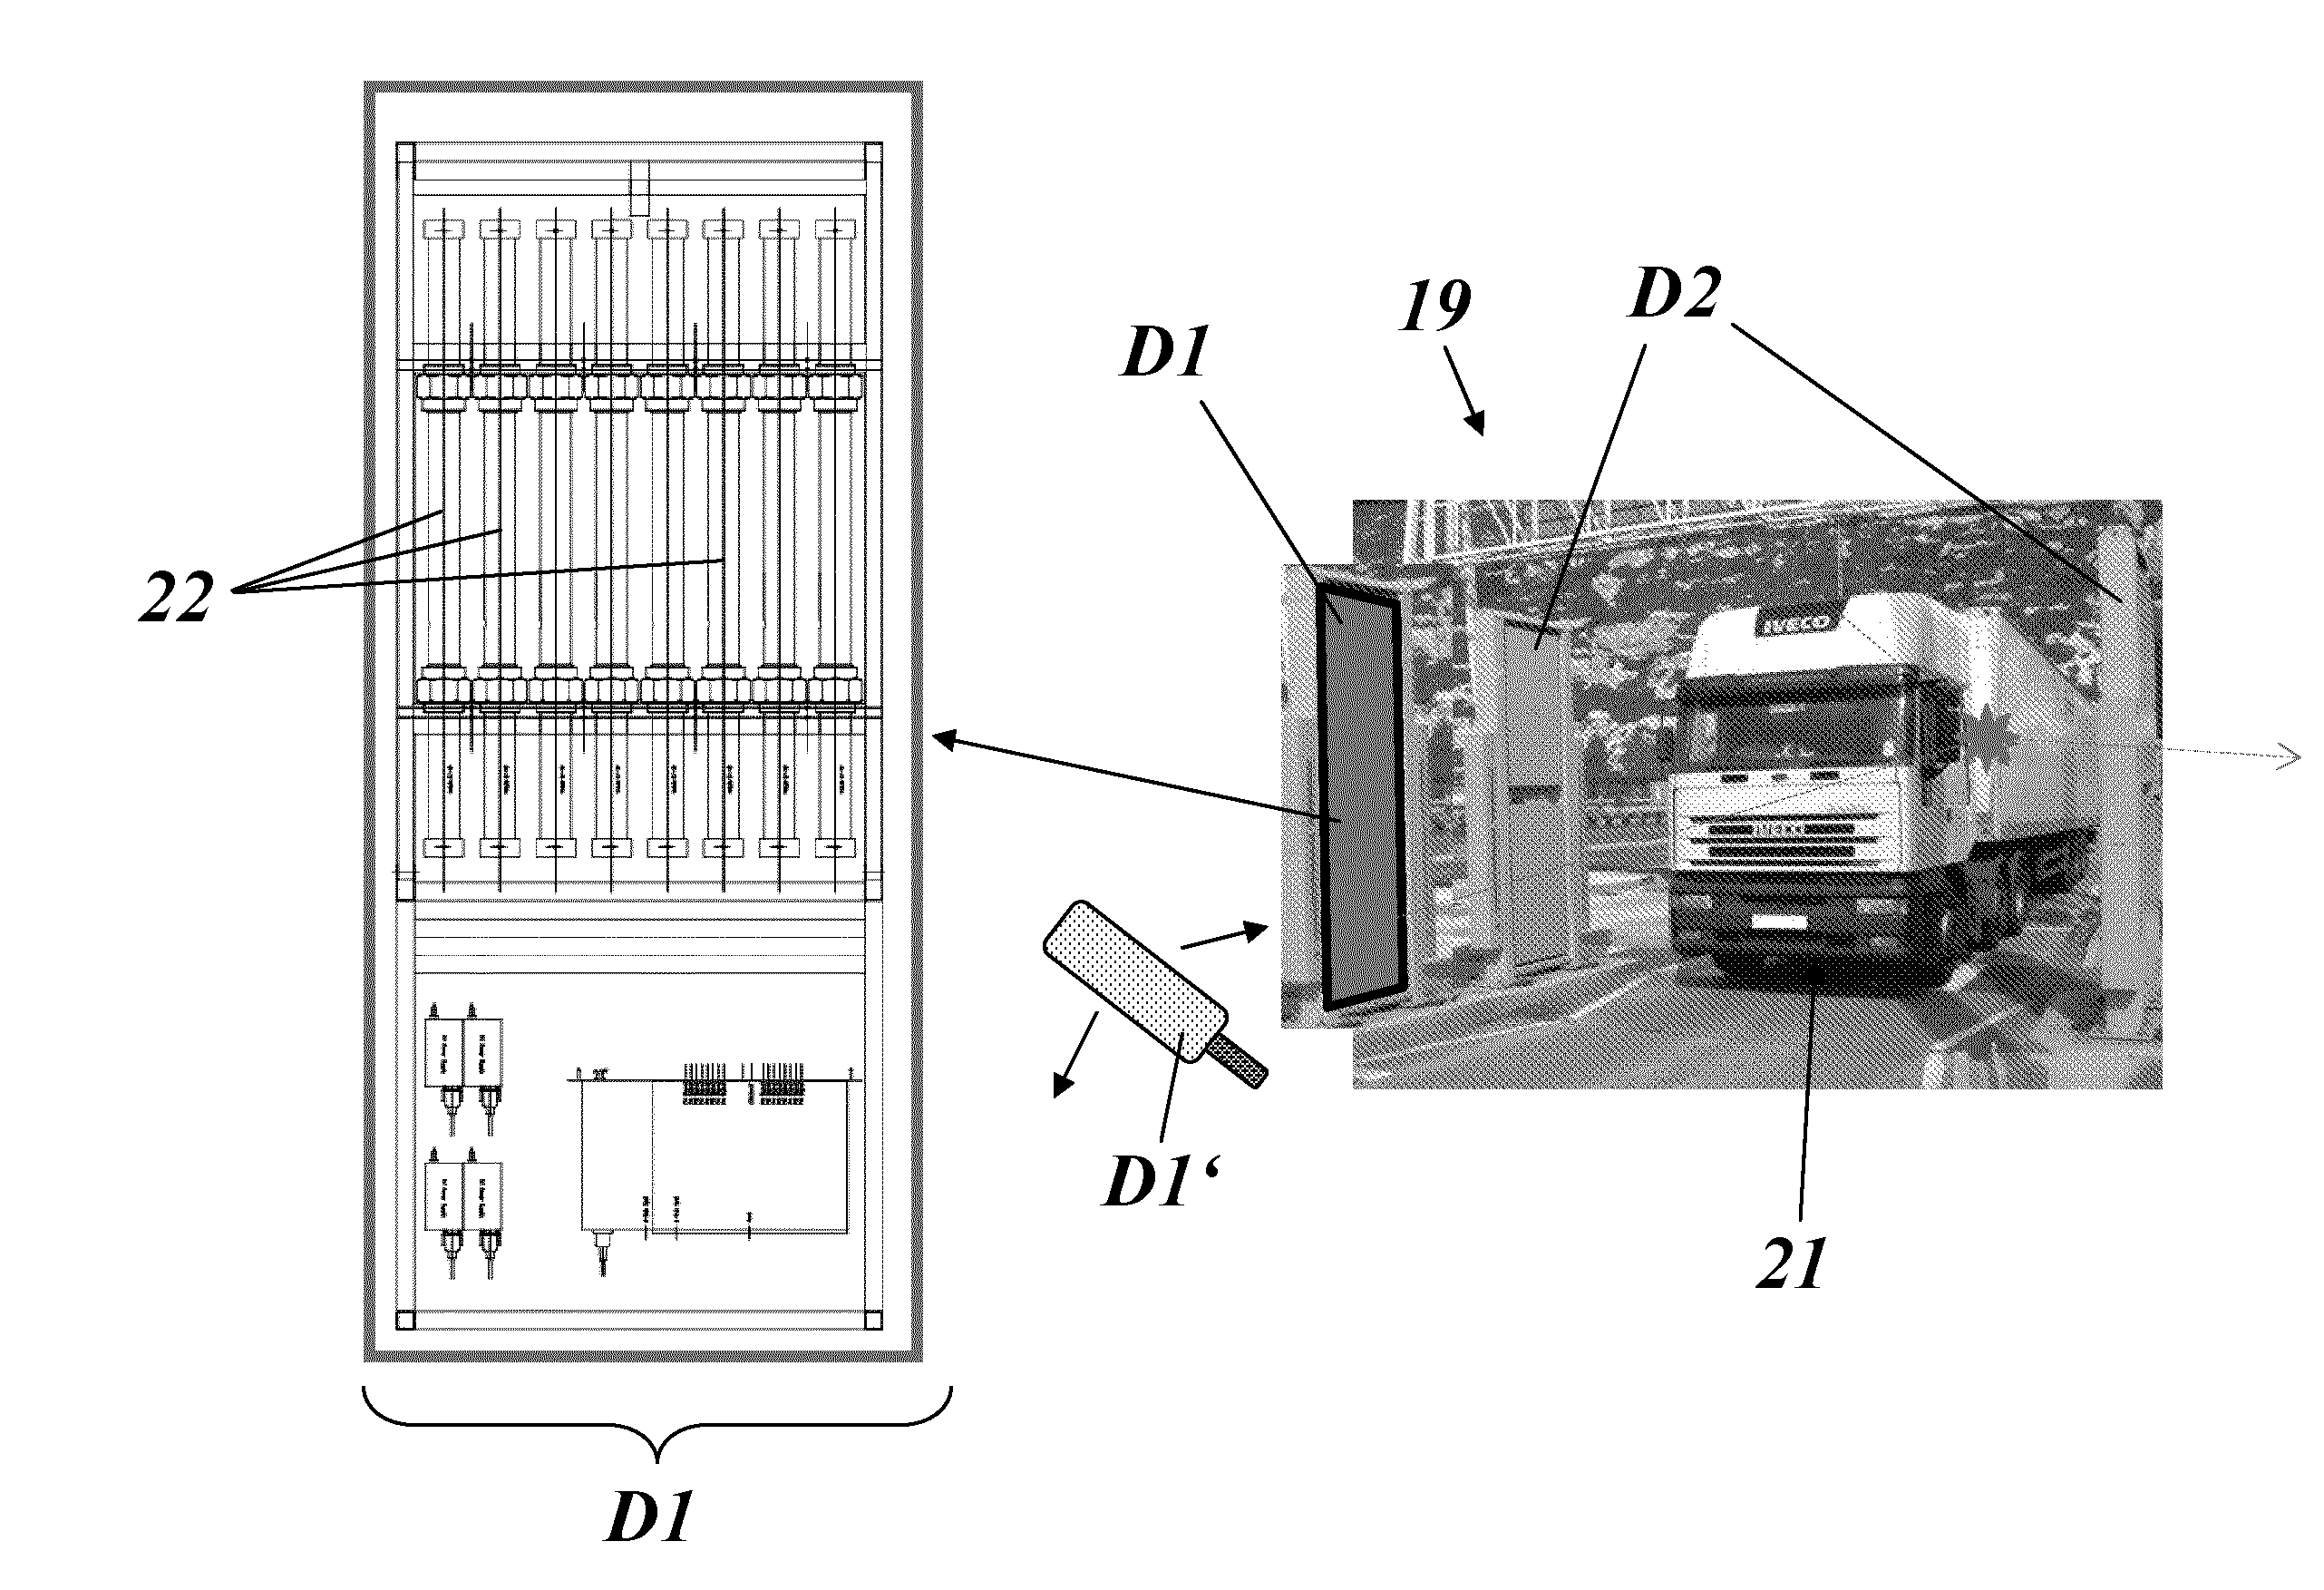 Method for Obtaining Information Signatures from Nuclear Material or About the Presence, the Nature and/or the Shielding of a Nuclear Material and Measurement Setup for Performing Such Method